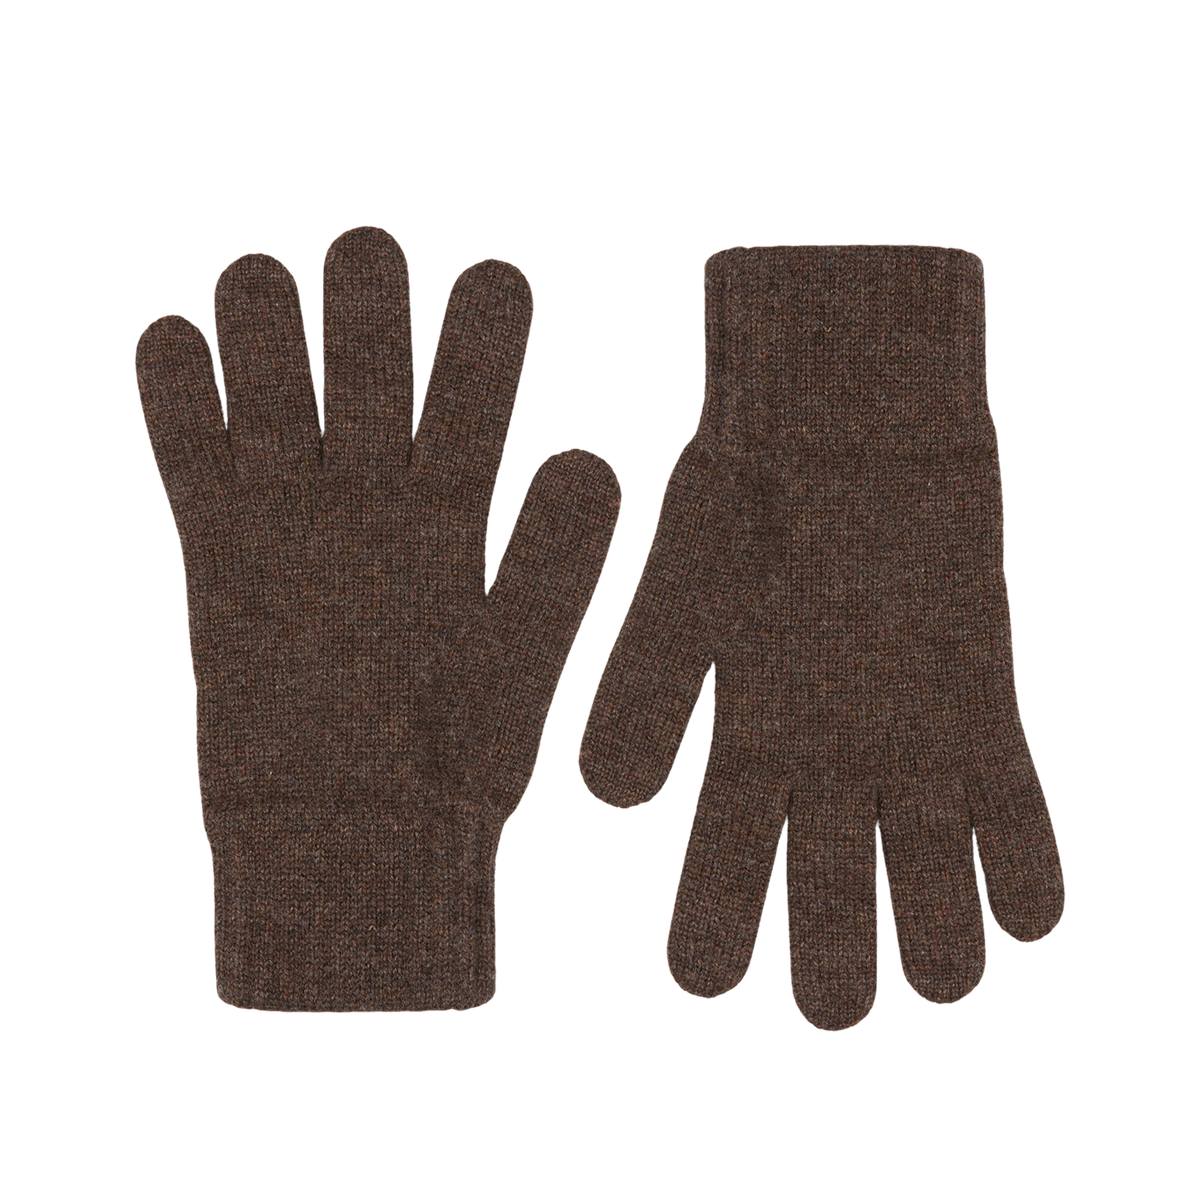 A pair of Porcupine Brown Pure Cashmere gloves by William Lockie.